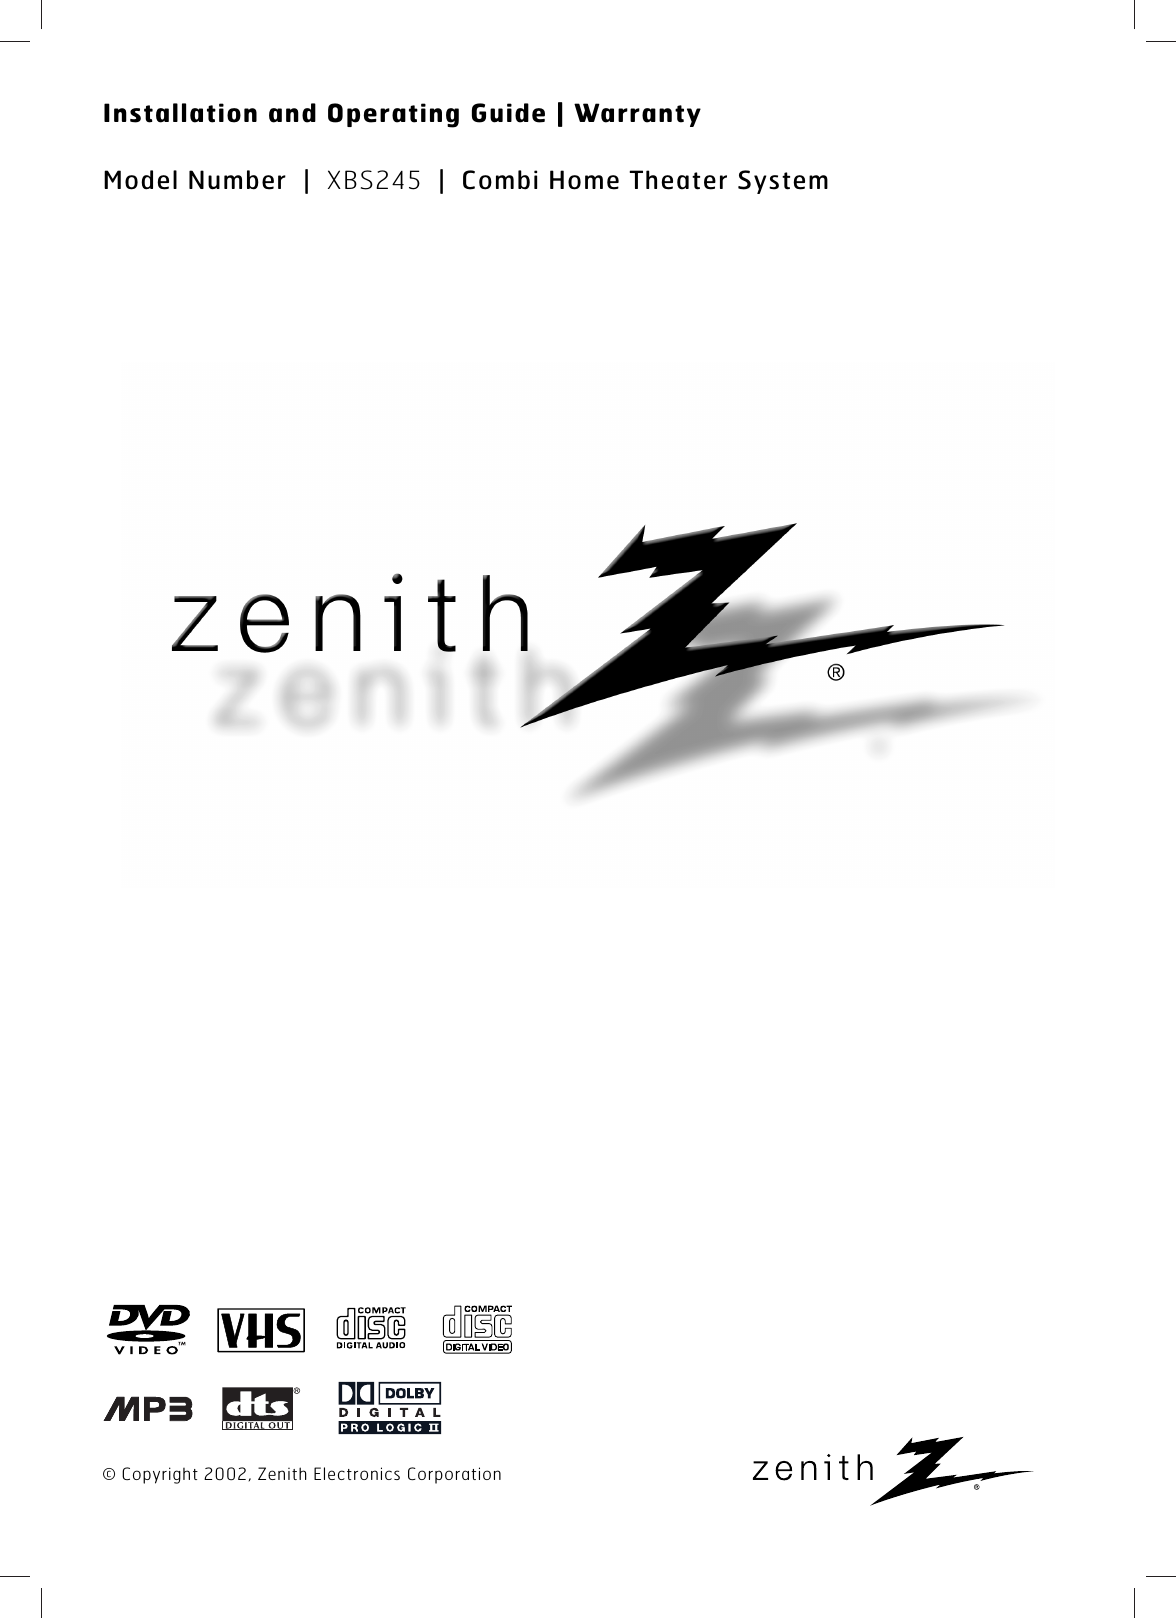 © Copyright 2002, Zenith Electronics CorporationInstallation and Operating Guide | WarrantyModel Number  | XBS245 | Combi Home Theater System